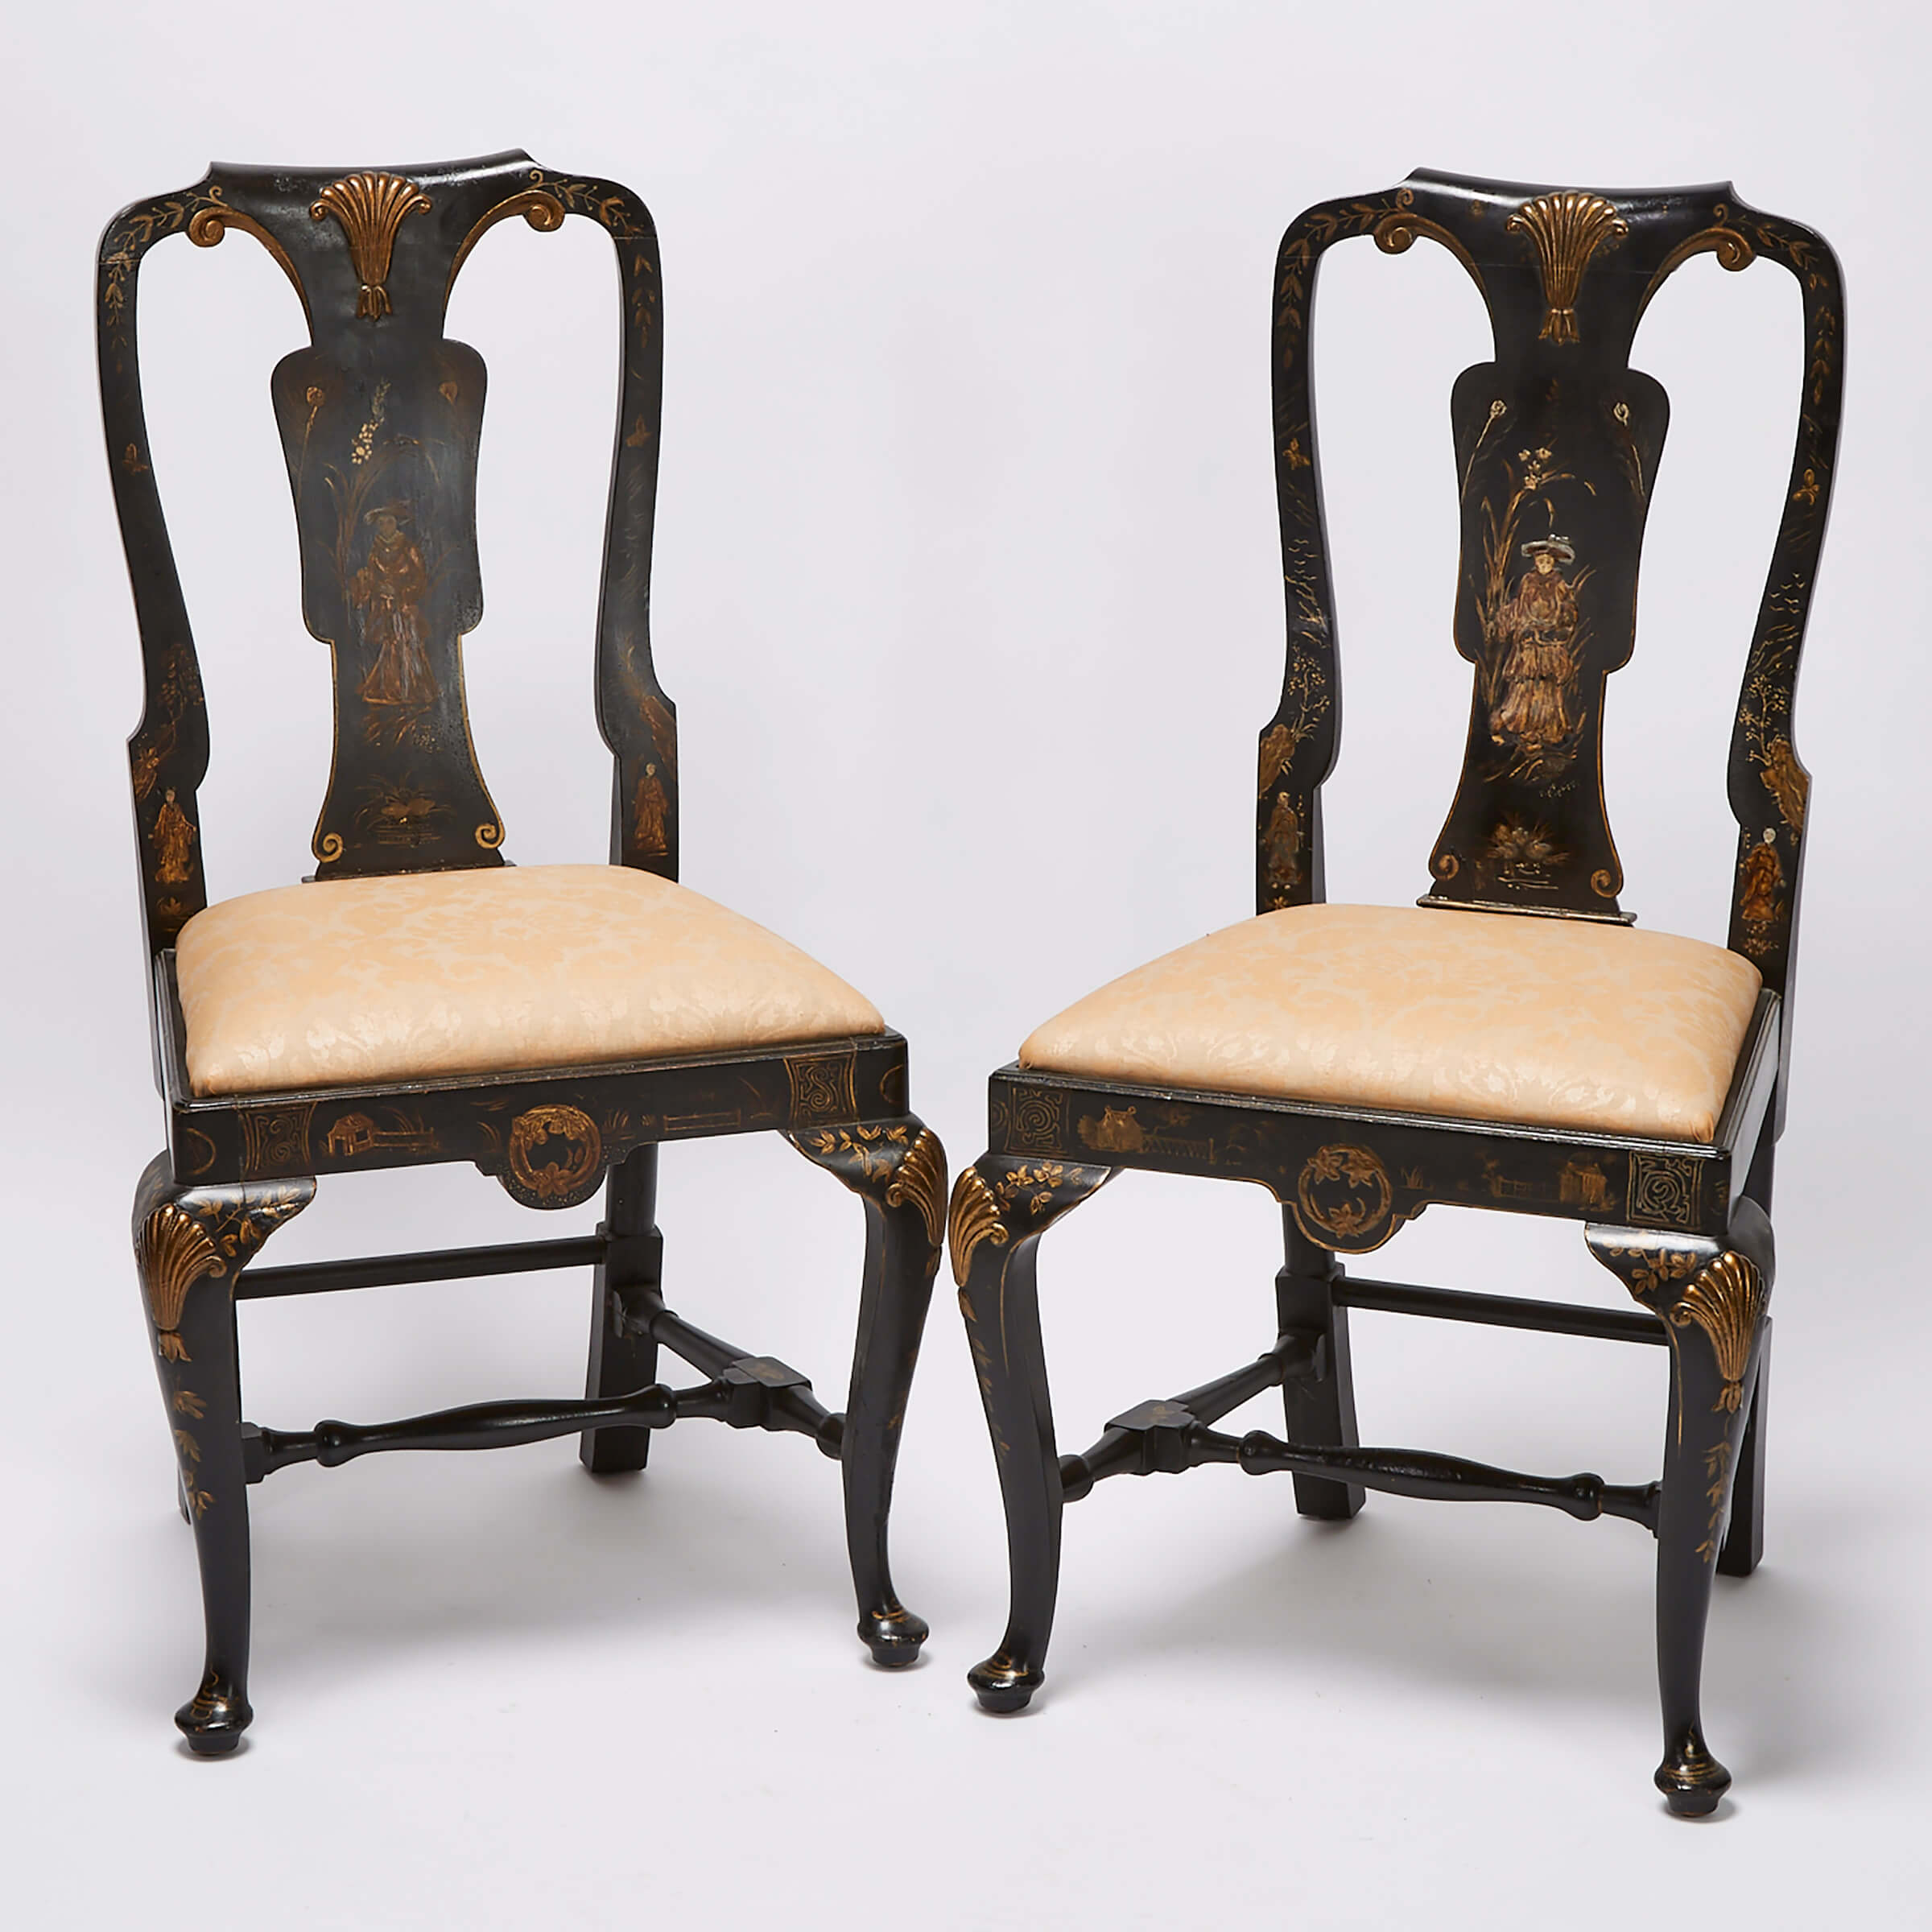 Pair of Queen Anne Style Chinoiserie Lacquered Side Chairs, early 20th century